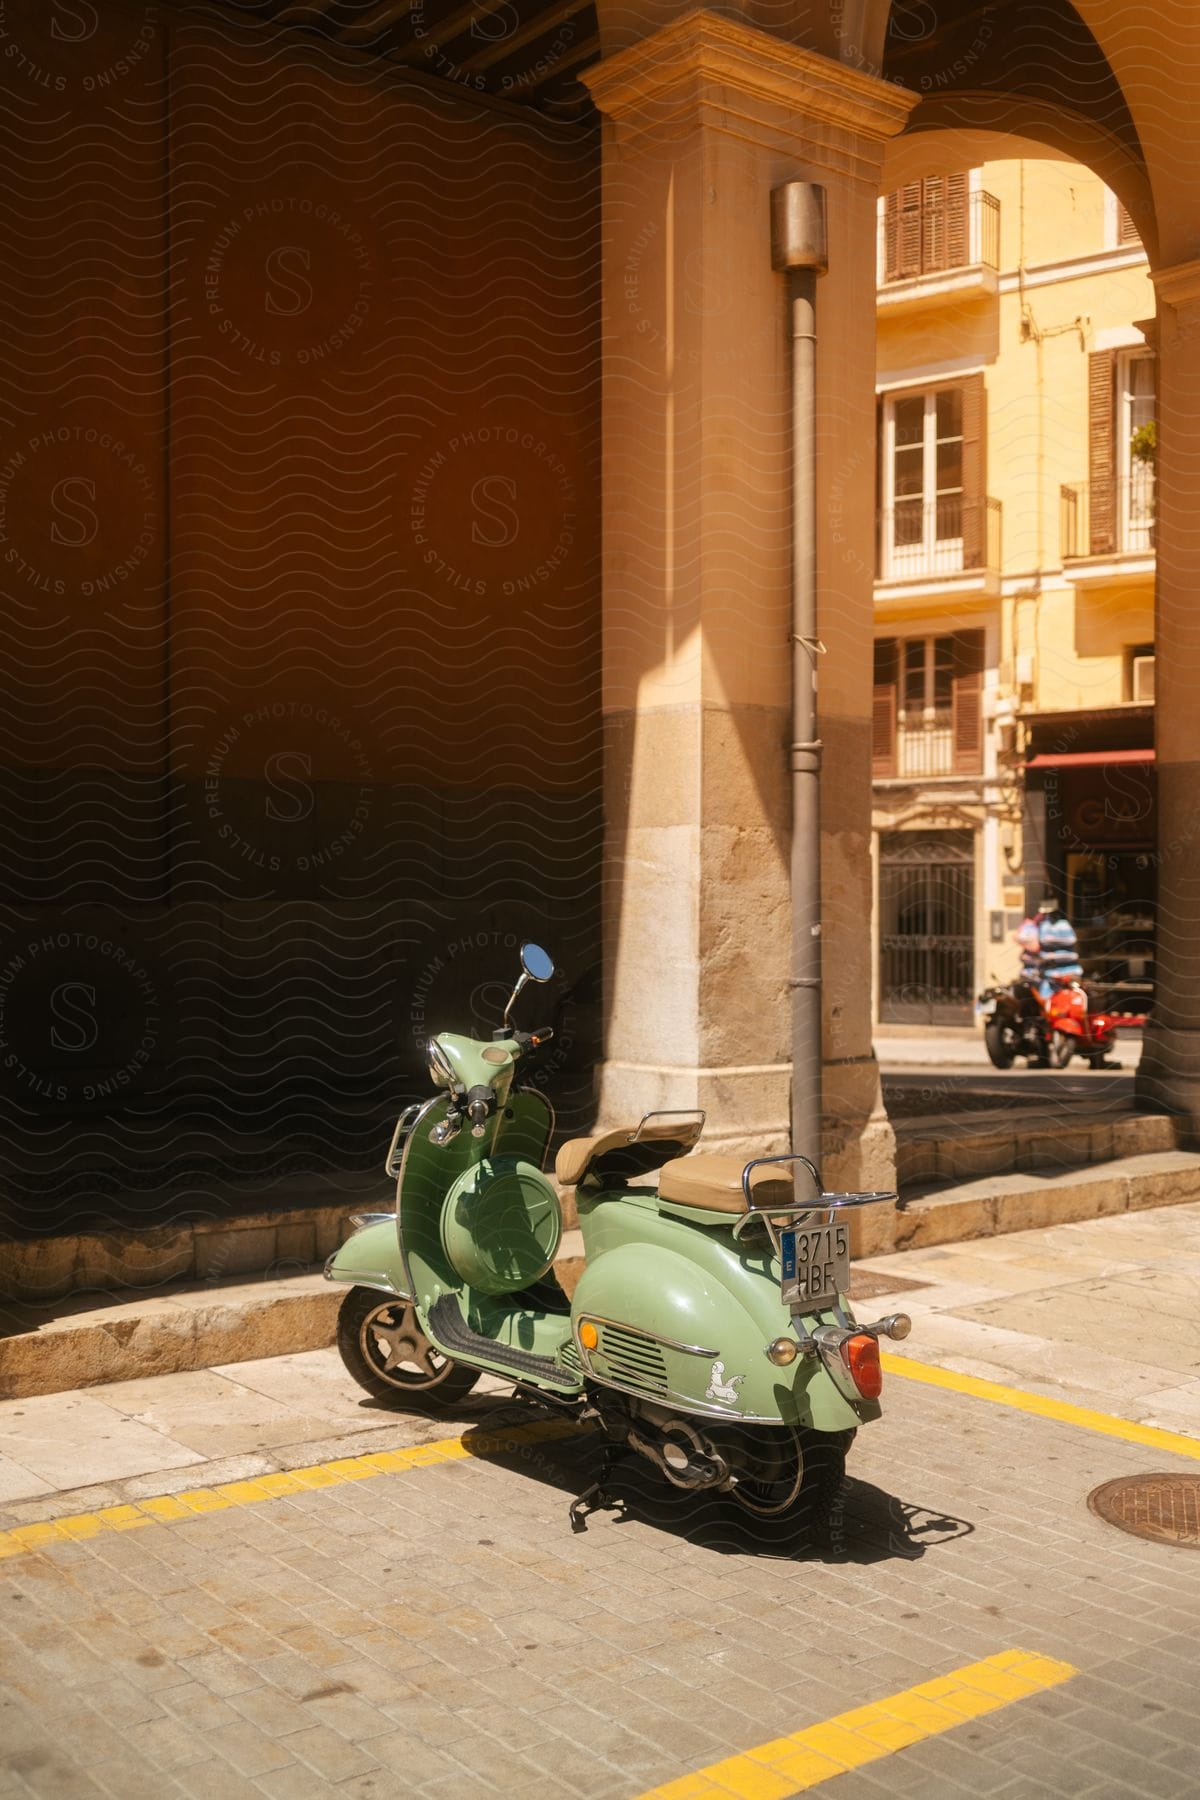 An old green motorcycle parked near a building with arches in a city